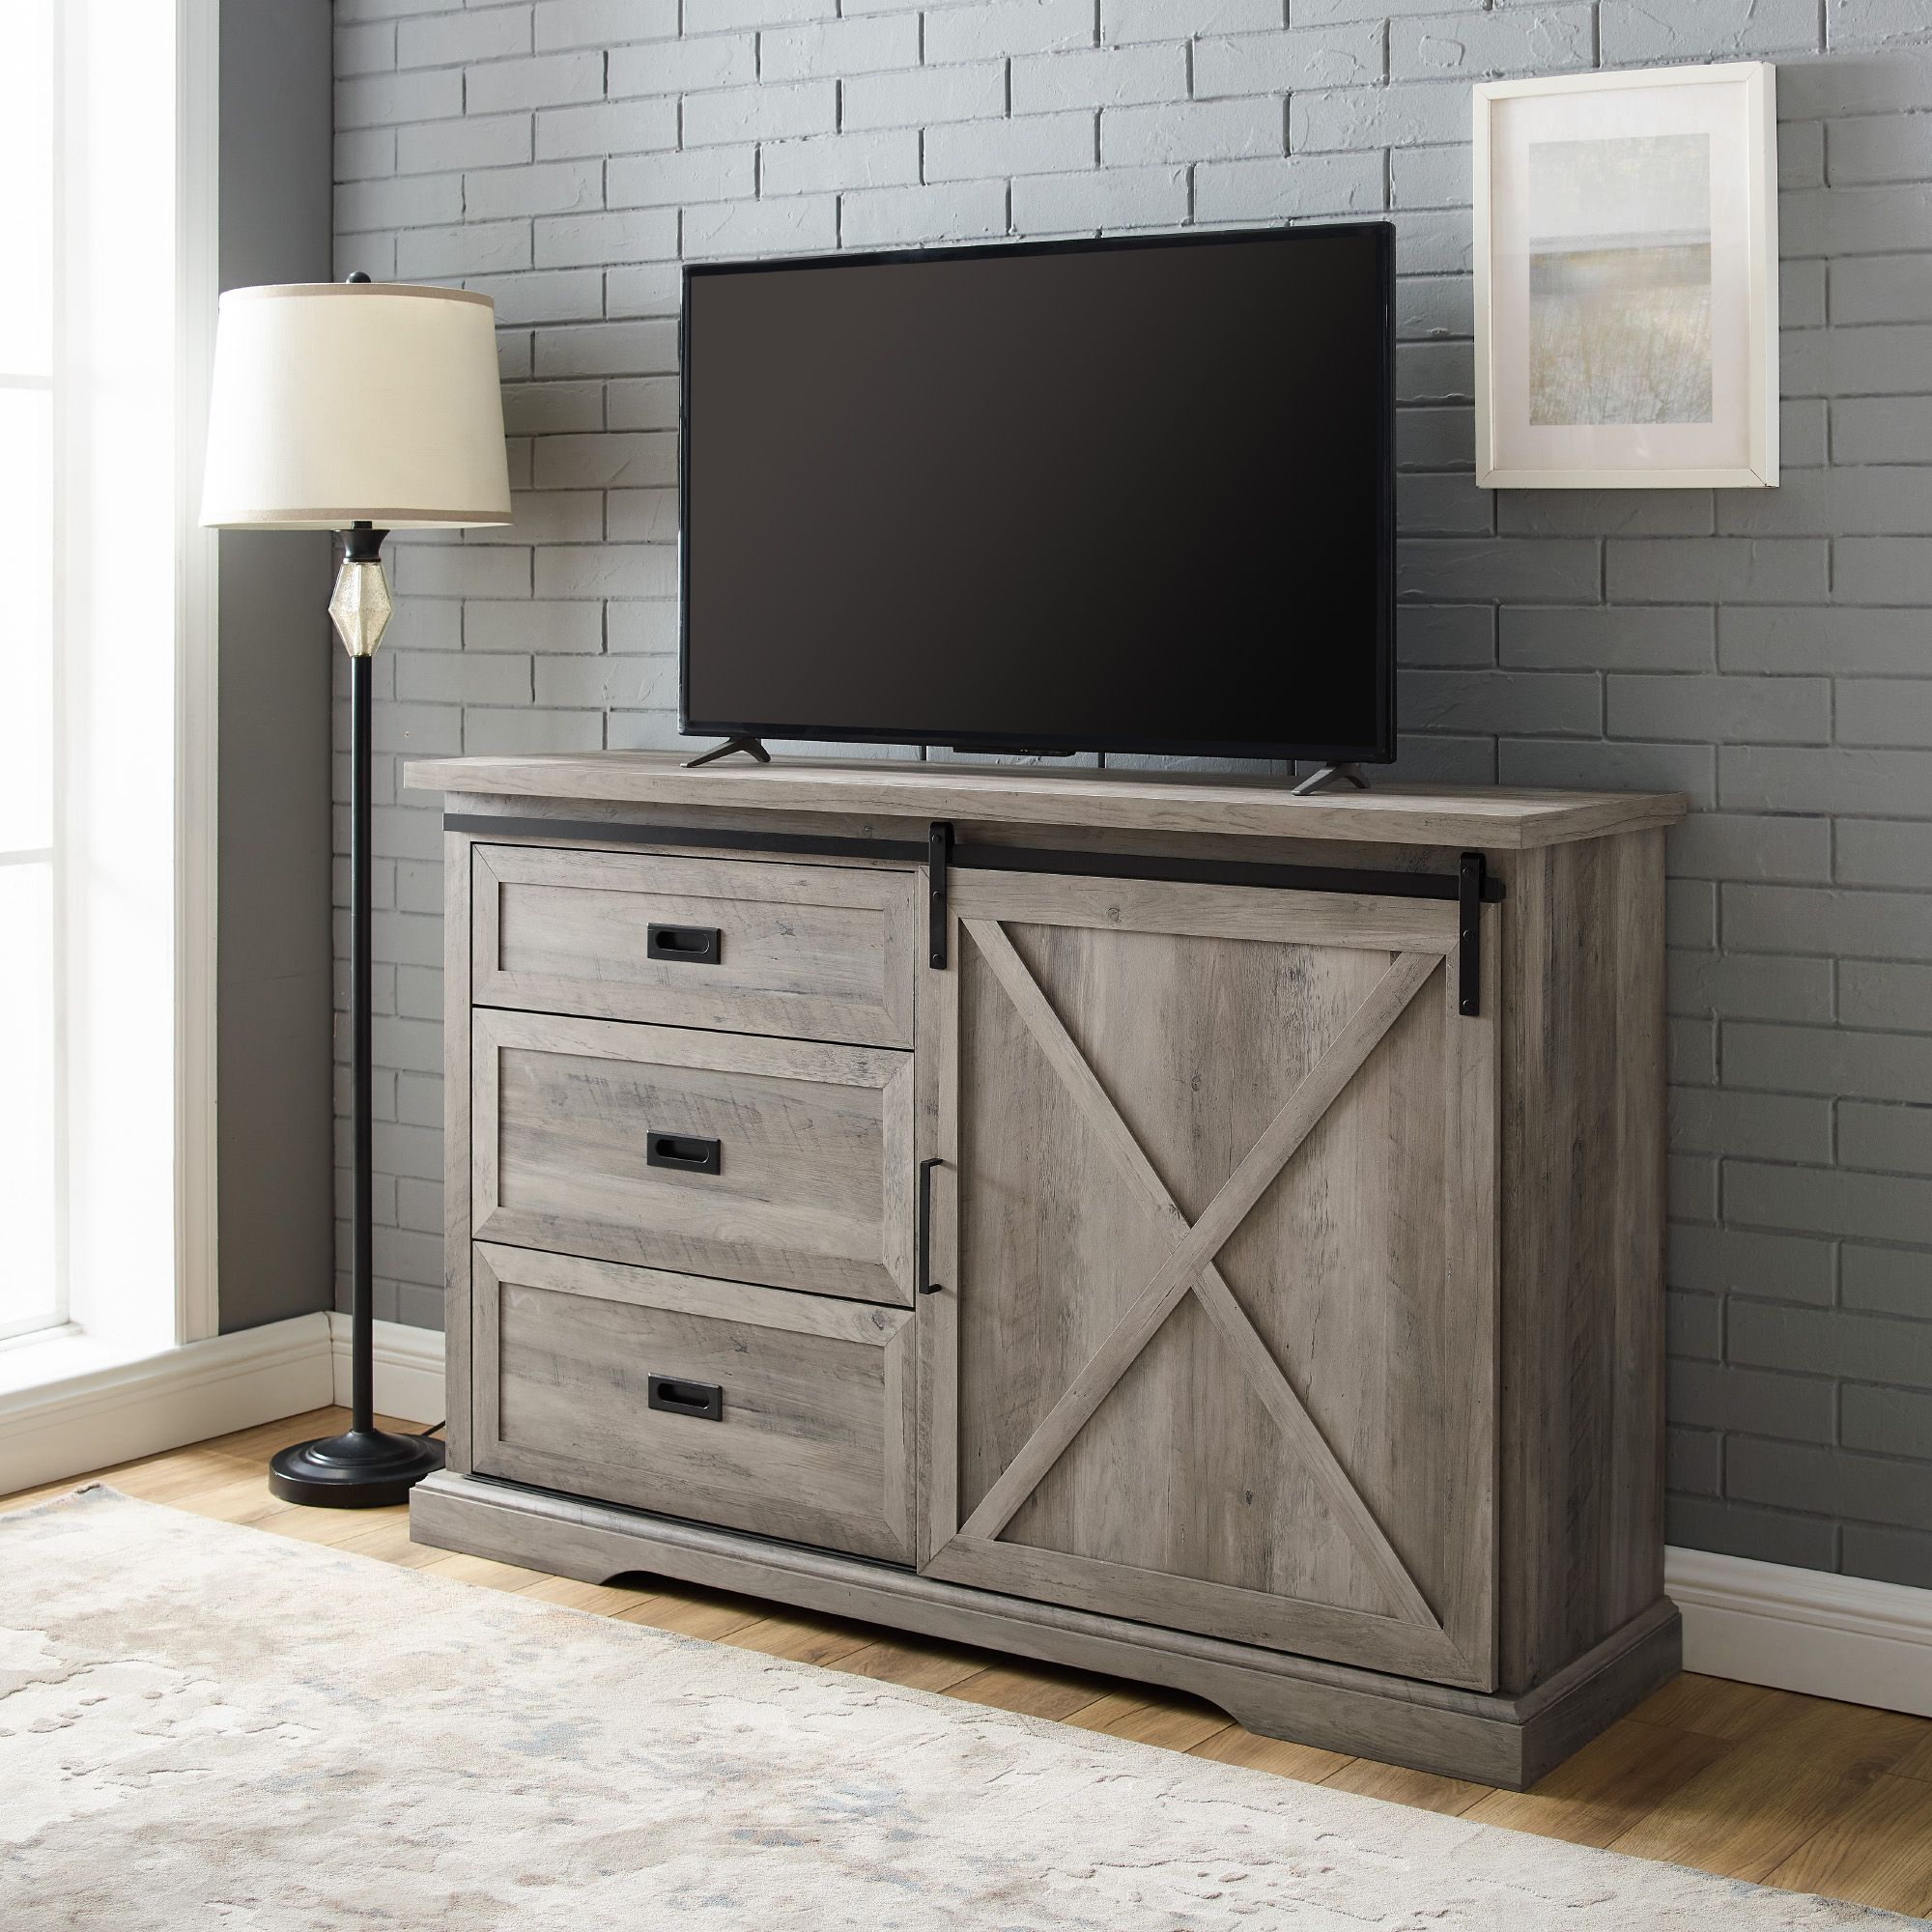 Camden Corner Tv Stands For Tvs Up To 60" For Favorite Manor Park Sliding Door Tv Stand For Tvs Up To 60", Grey (Photo 10 of 10)